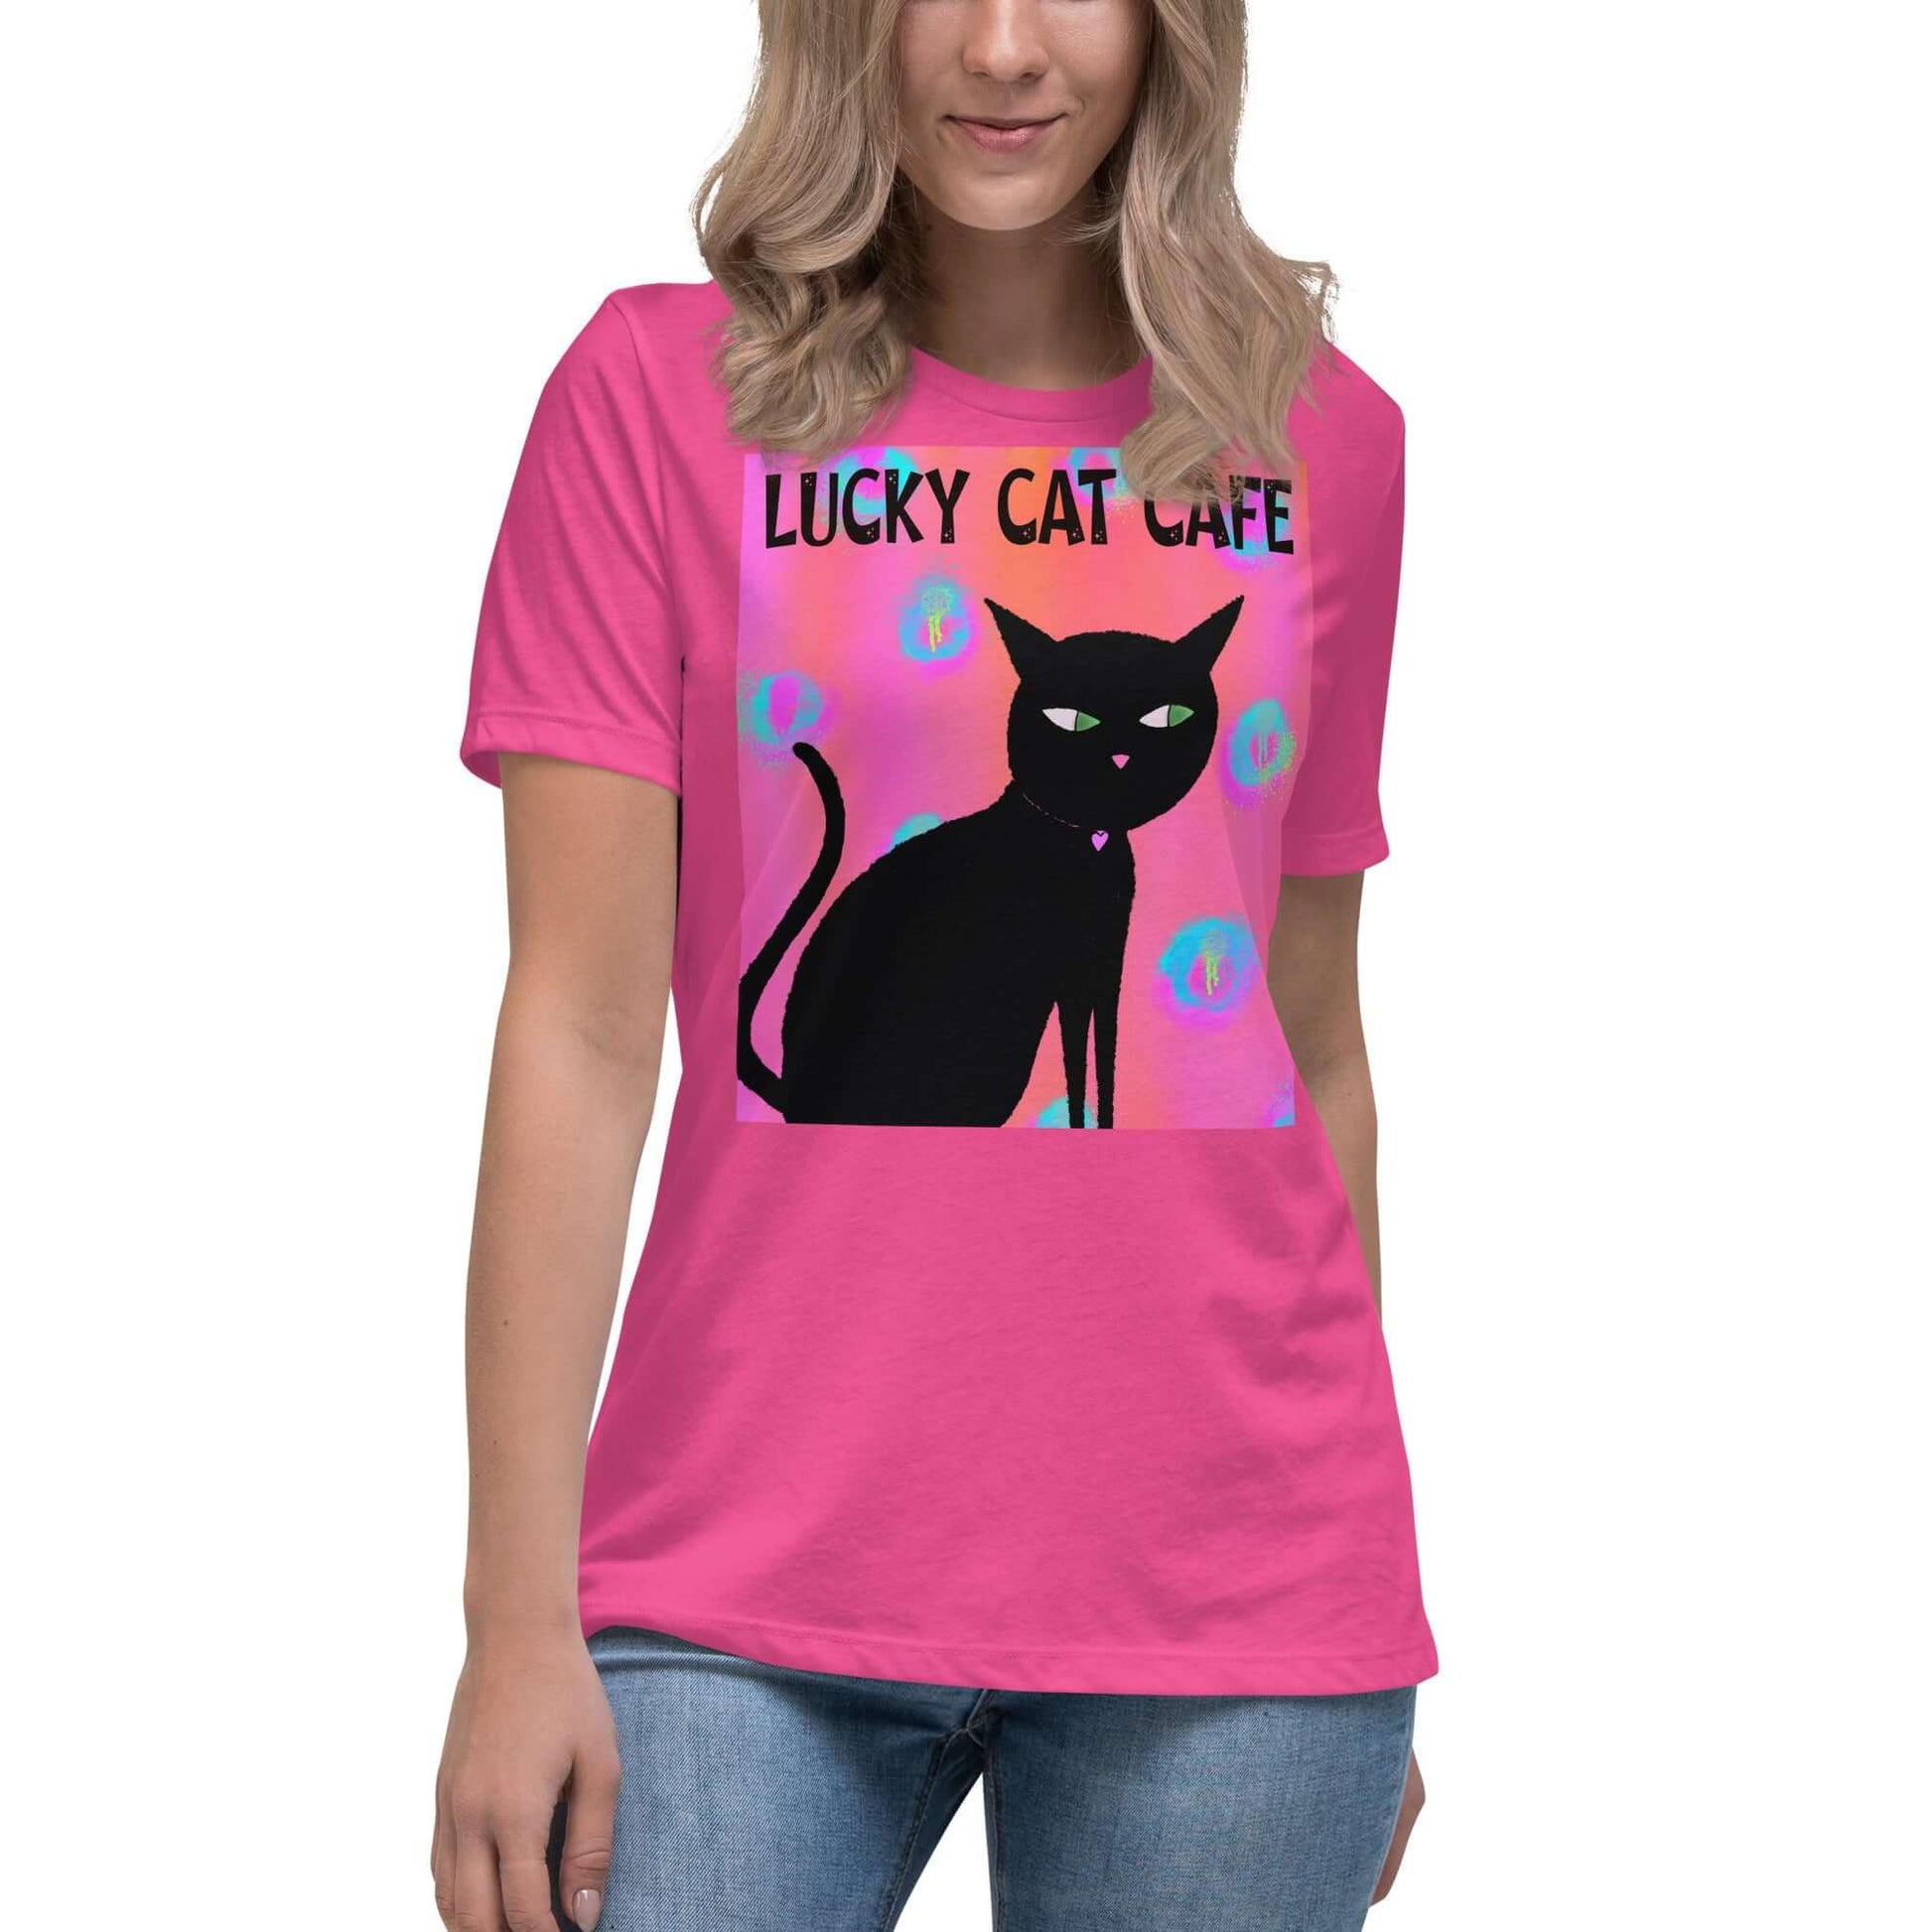 Black Cat on Hot Pink Tie Dye Background with Text “Lucky Cat Cafe” Women’s Short Sleeve Tee in Berry